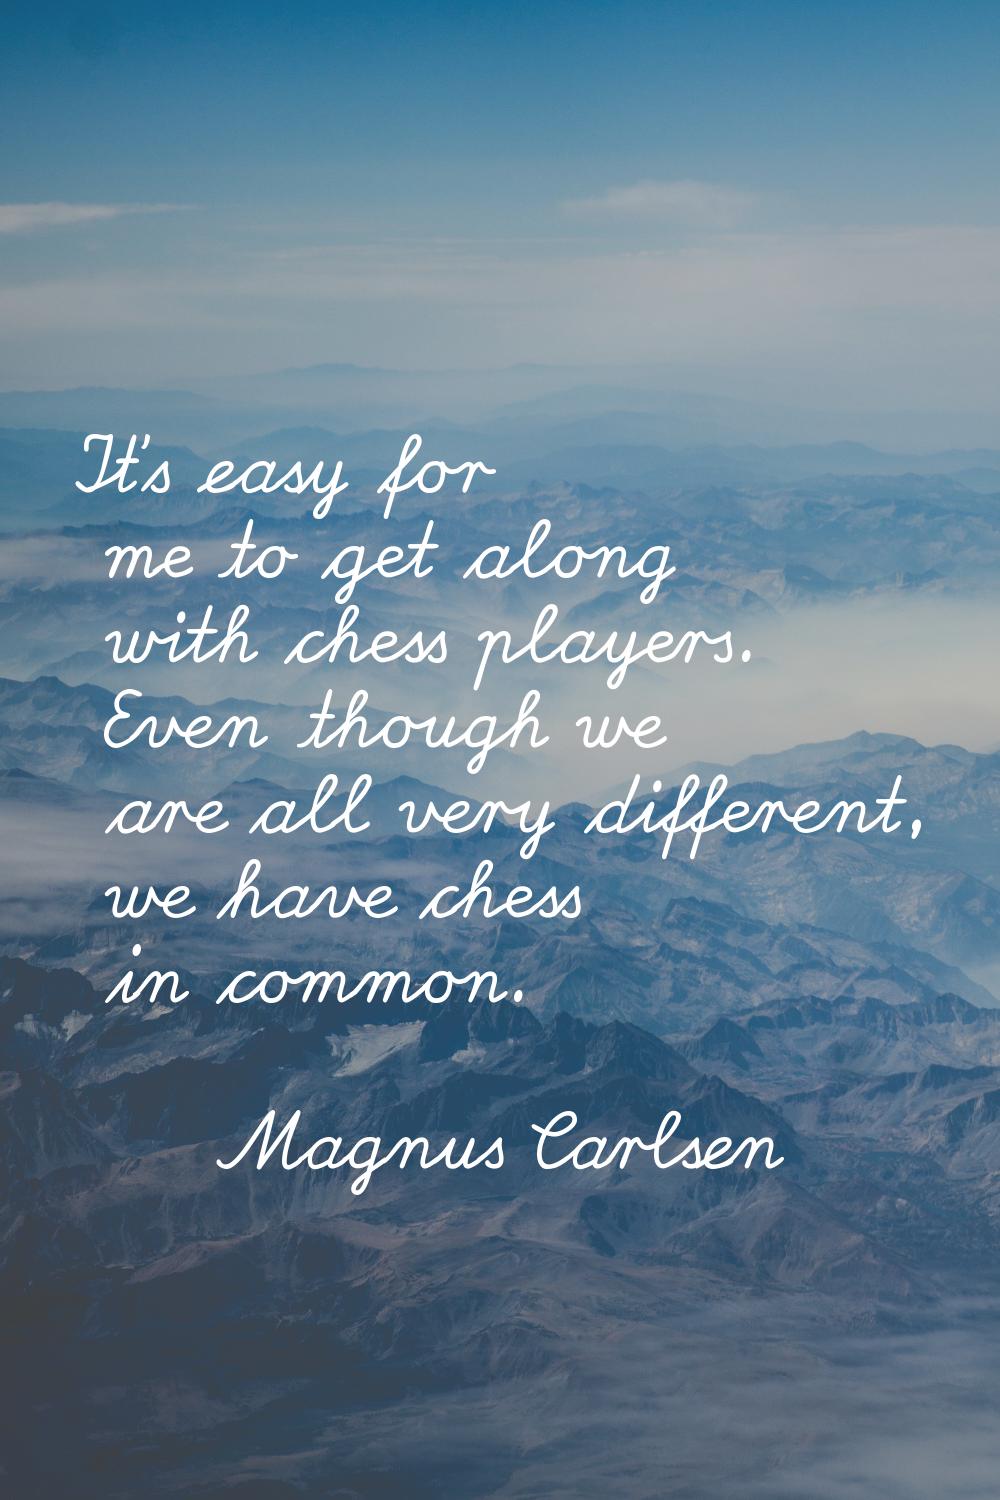 It's easy for me to get along with chess players. Even though we are all very different, we have ch